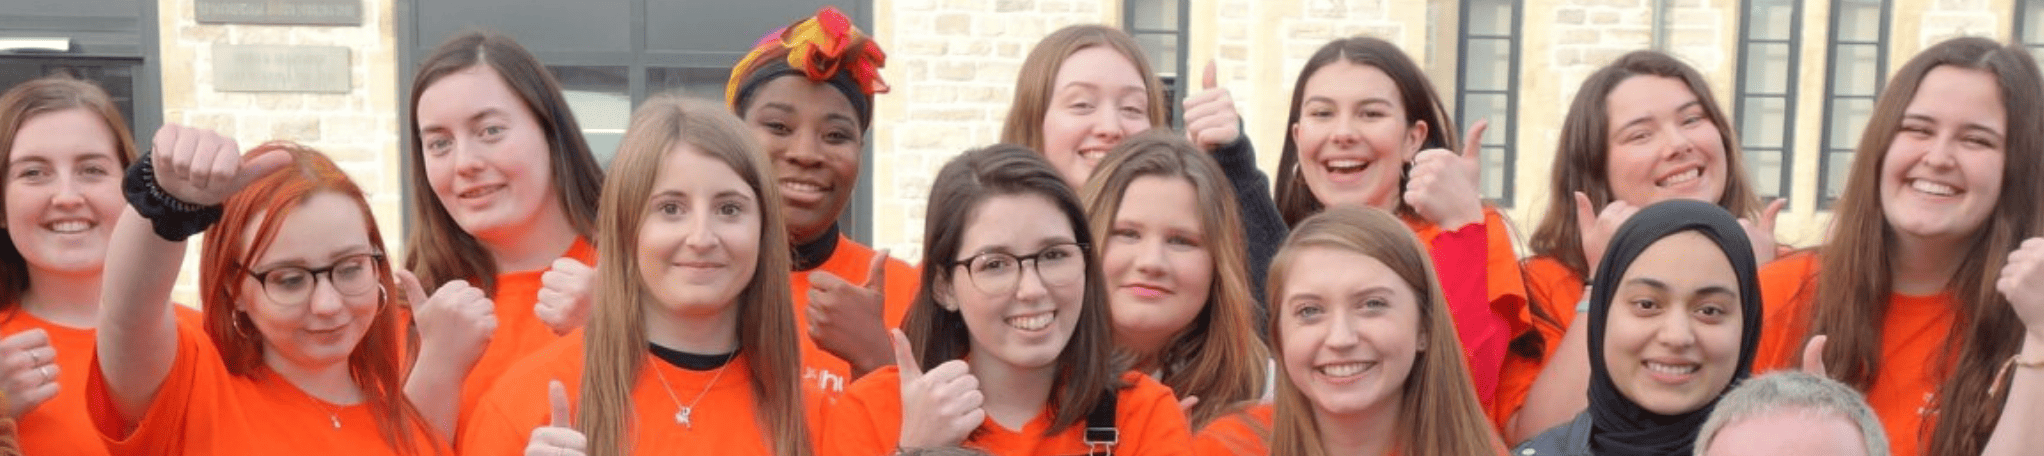 A group of student volunteers wearing orange t-shirts smile at the camera.